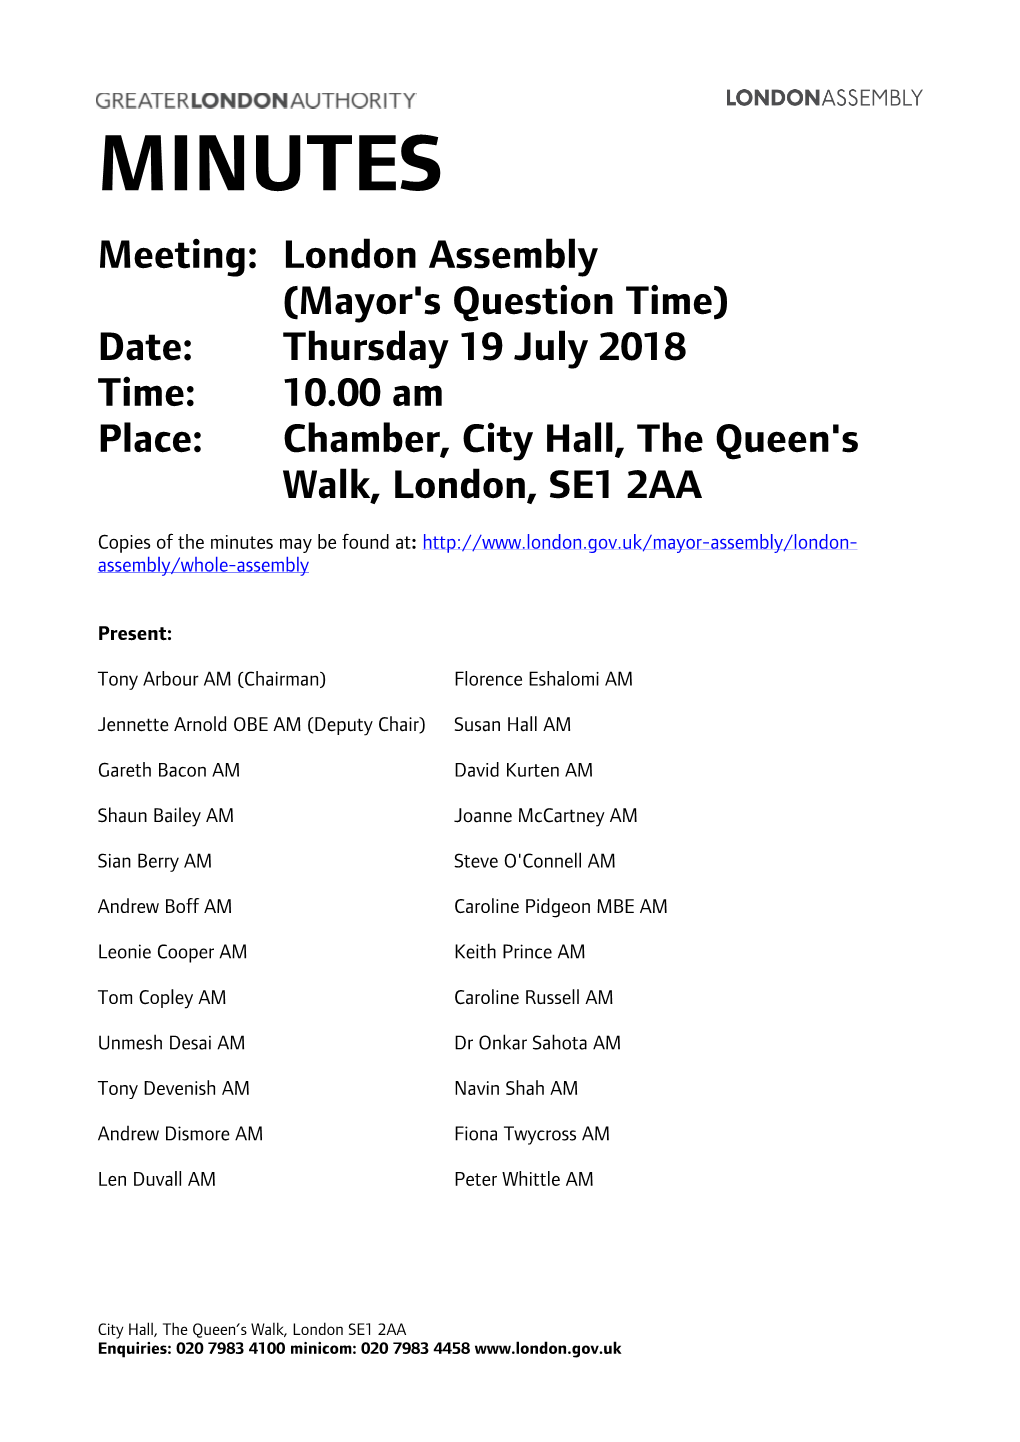 Minutes Document for London Assembly (Mayor's